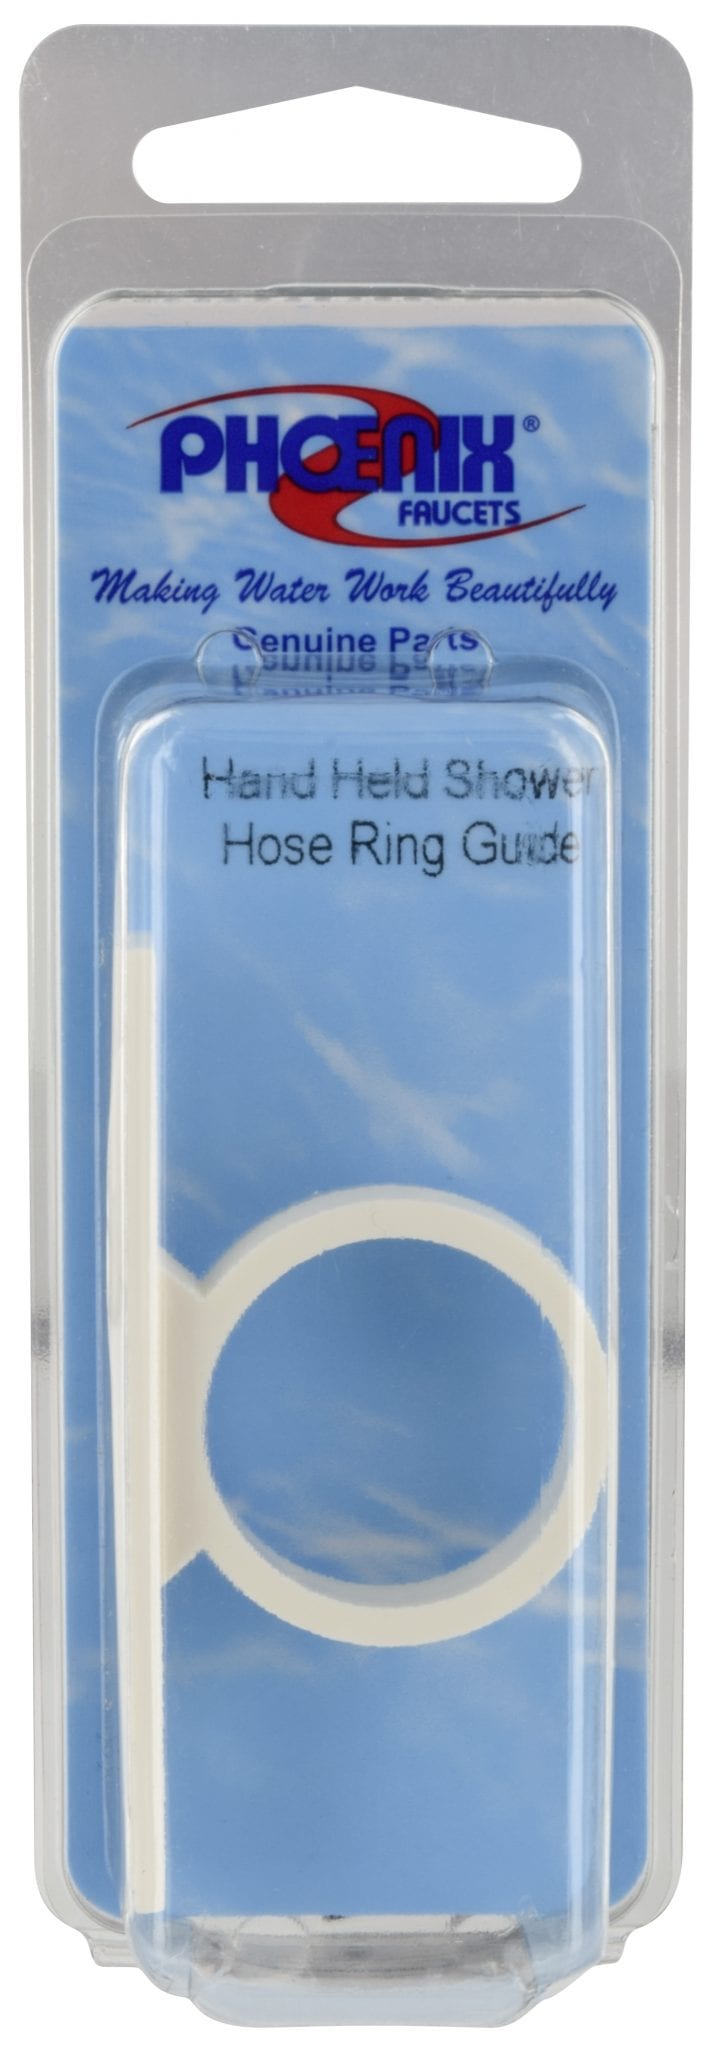 Replacement Shower Hose Guide - White  PF276010